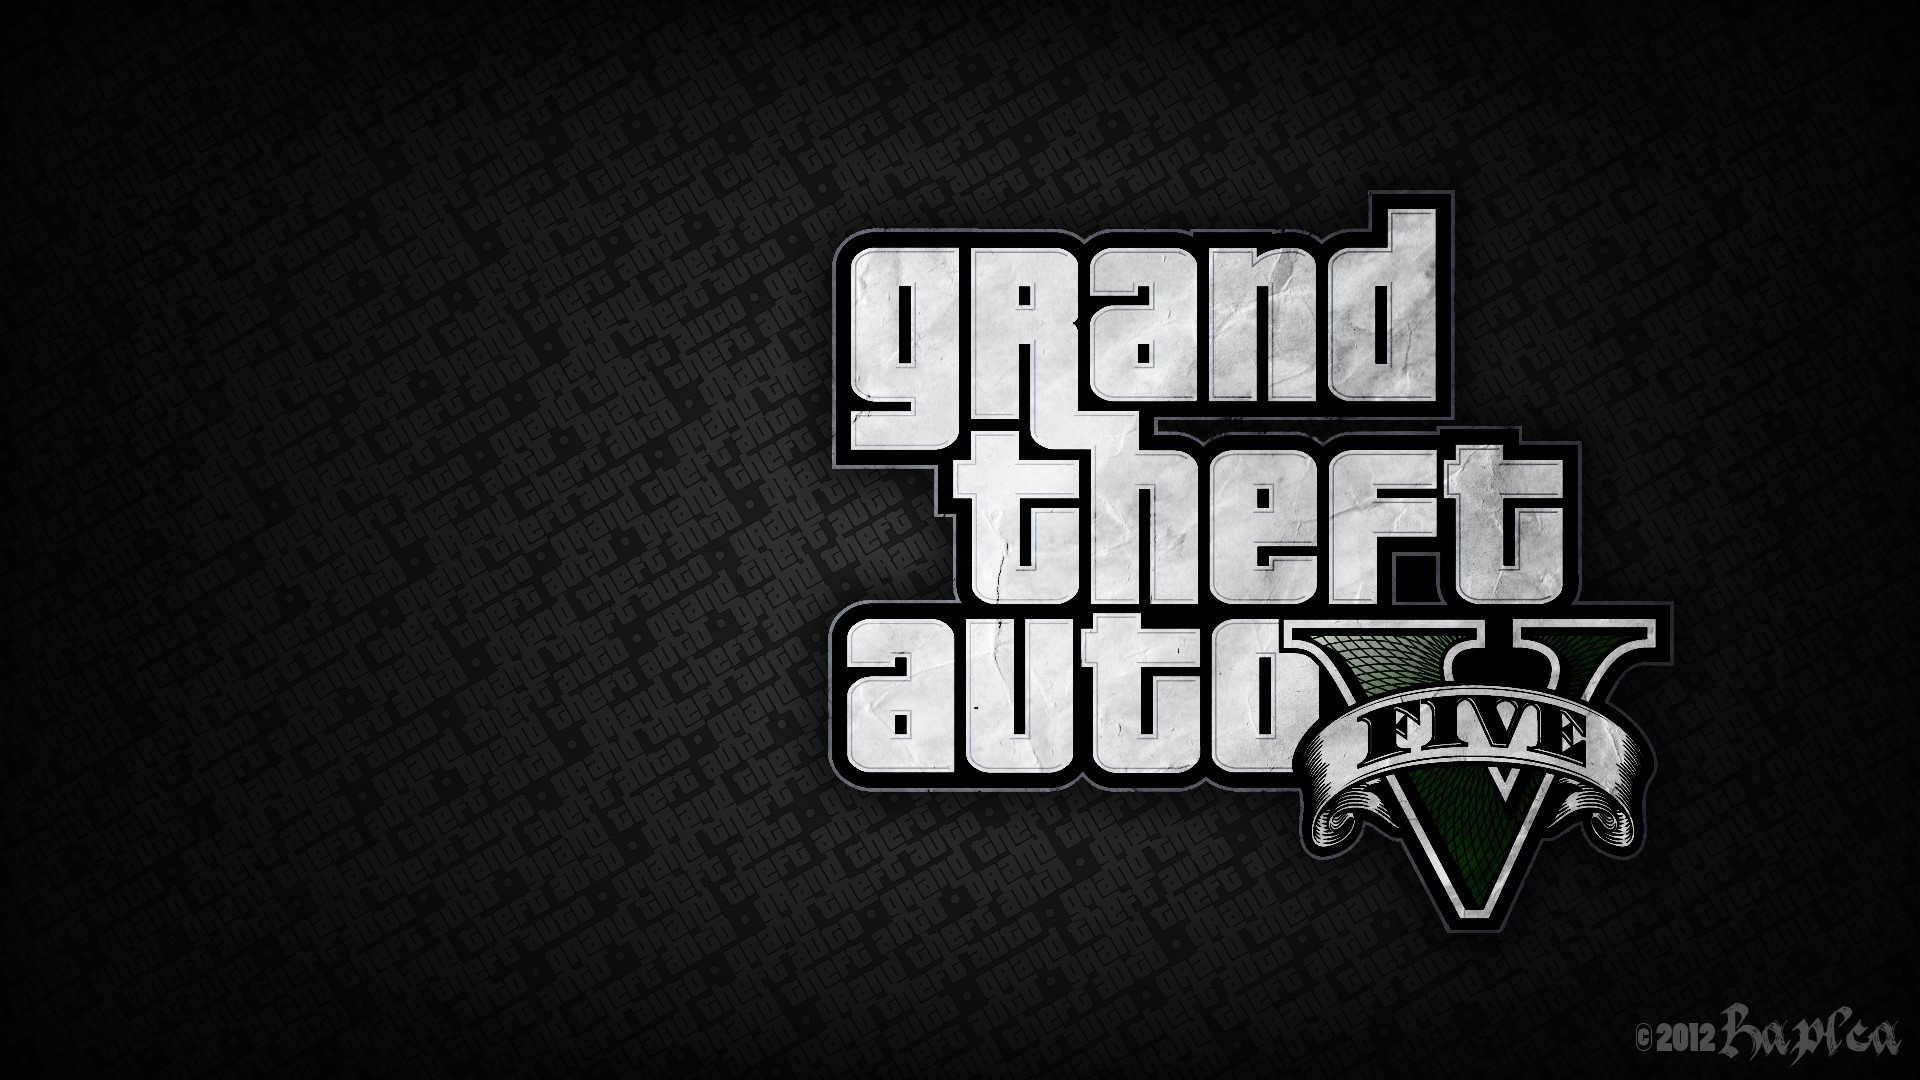 Grand theft auto V hd screensaver wallpapers and images   wallpapers